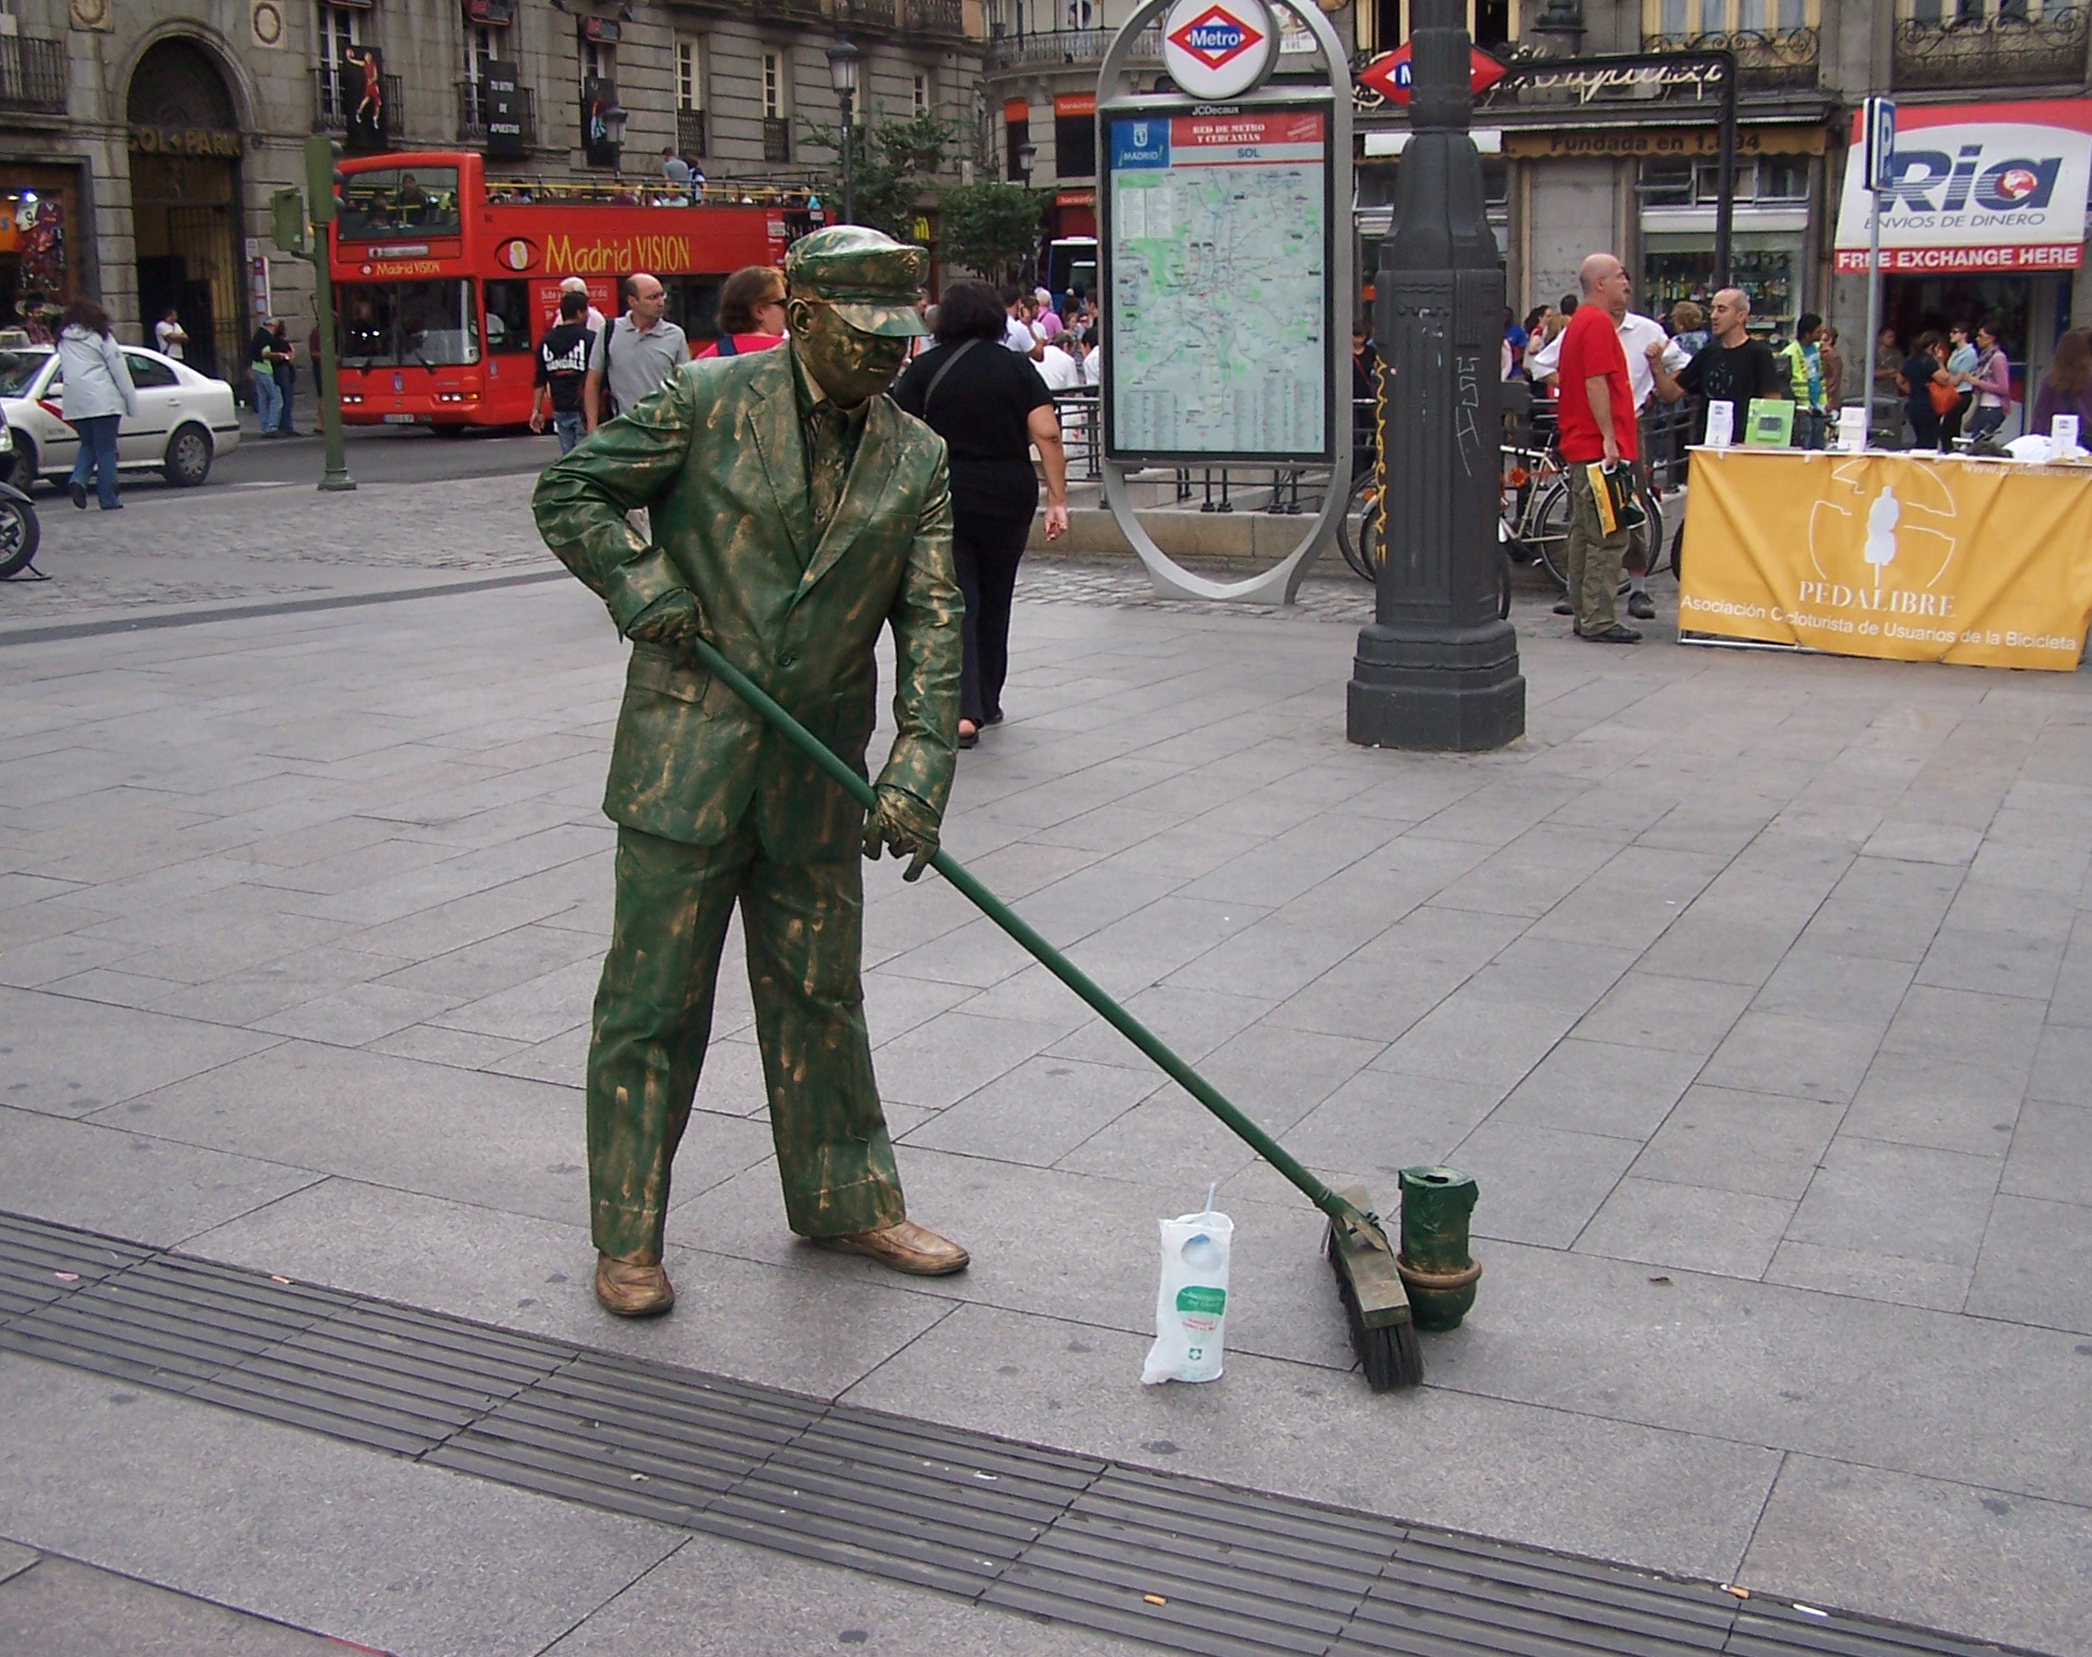 Madrid – Silly Street Performers | Sandie's Off the Beaten Path Blog